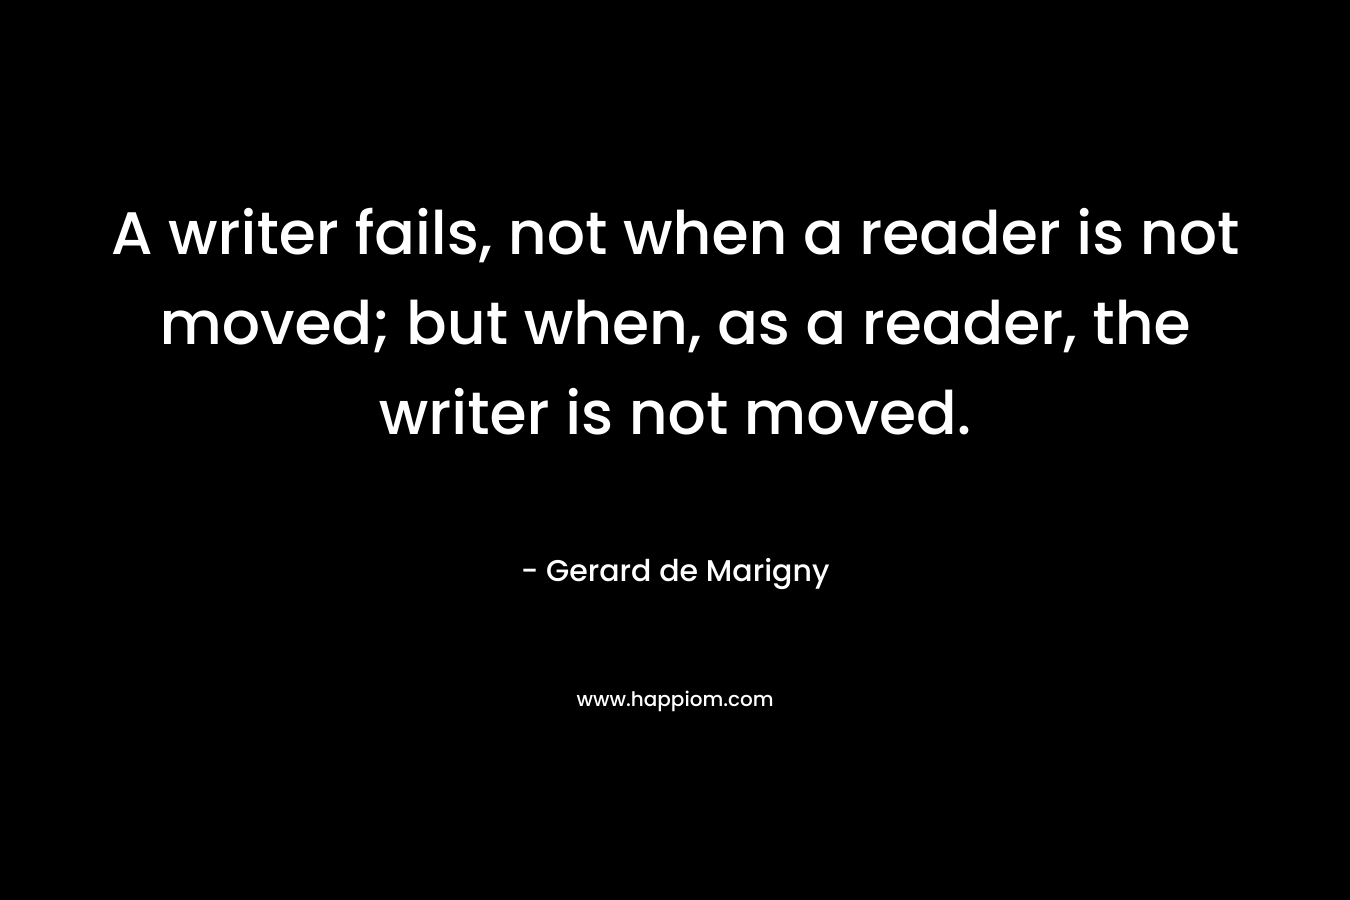 A writer fails, not when a reader is not moved; but when, as a reader, the writer is not moved.